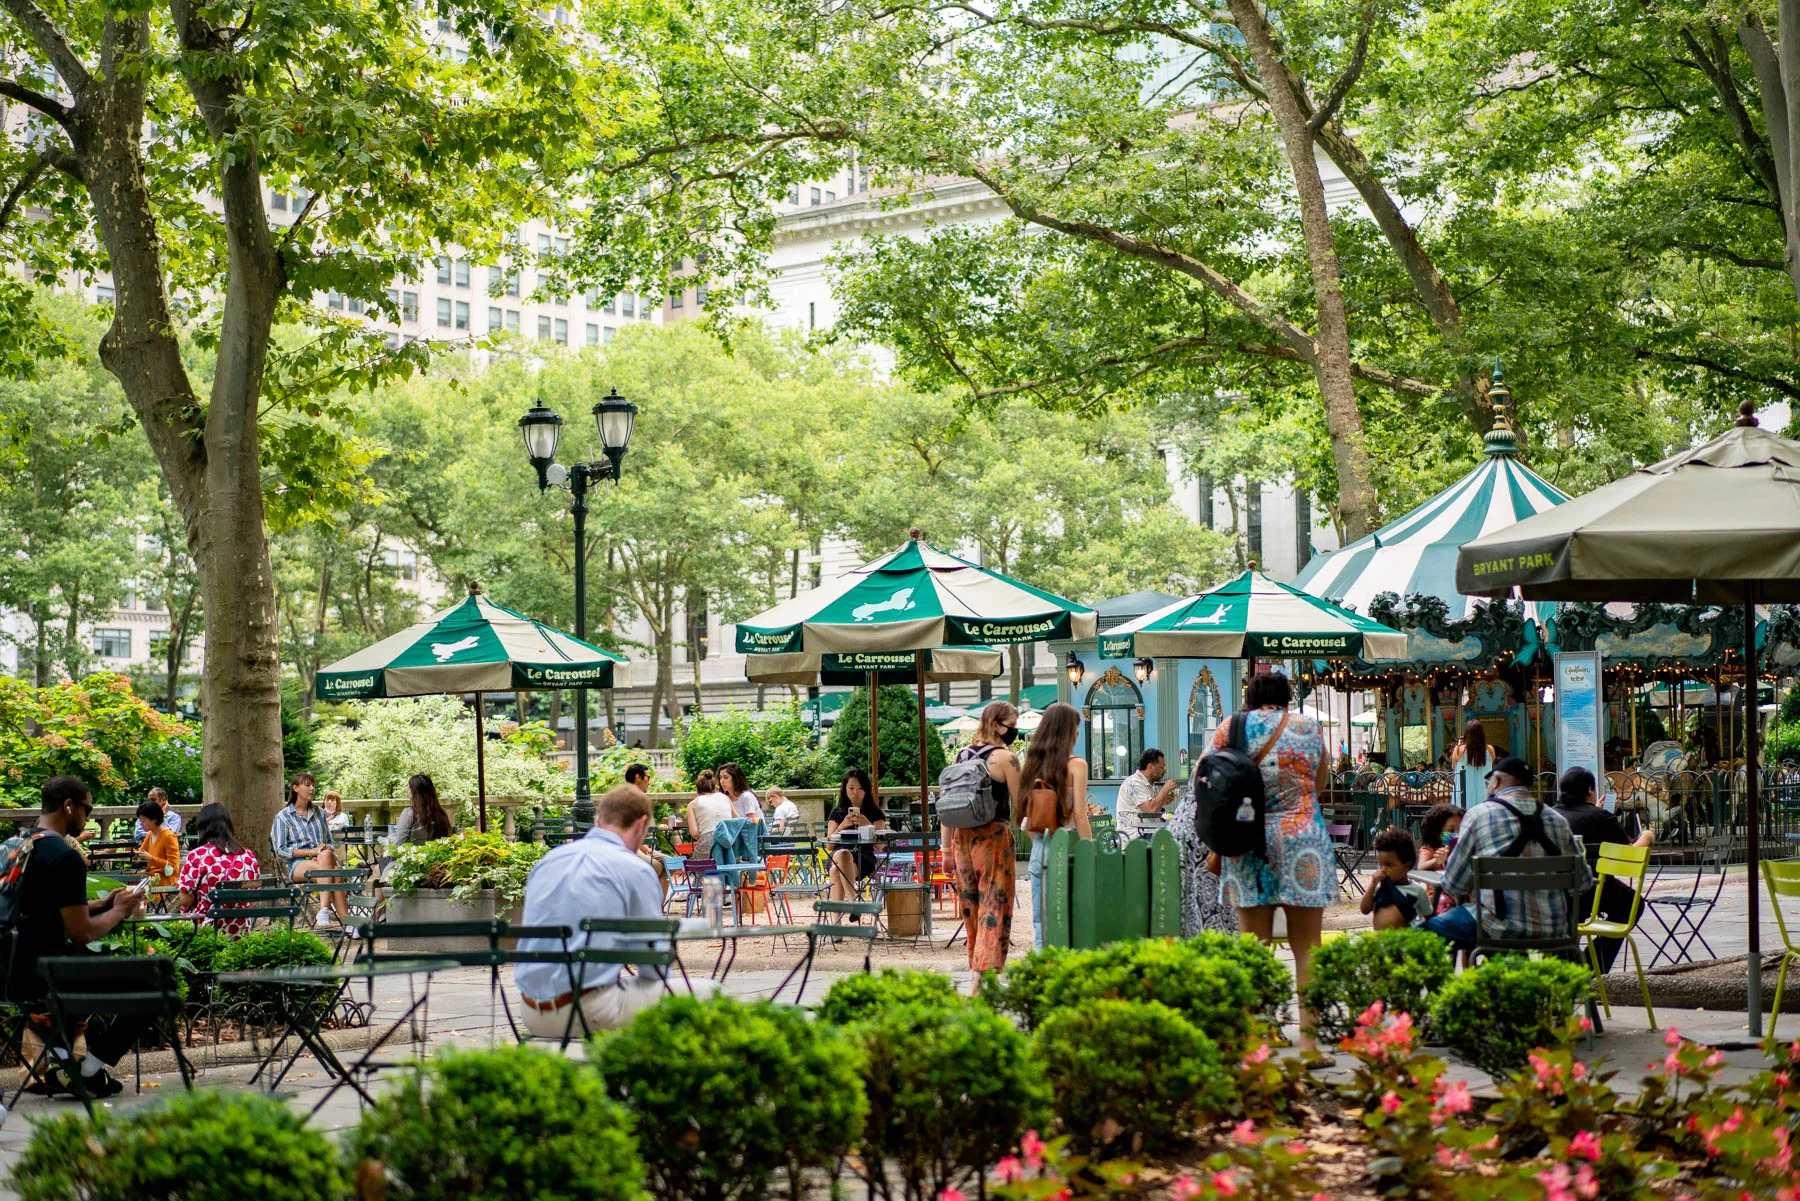 Bryant Park NYC Summer
August in NYC